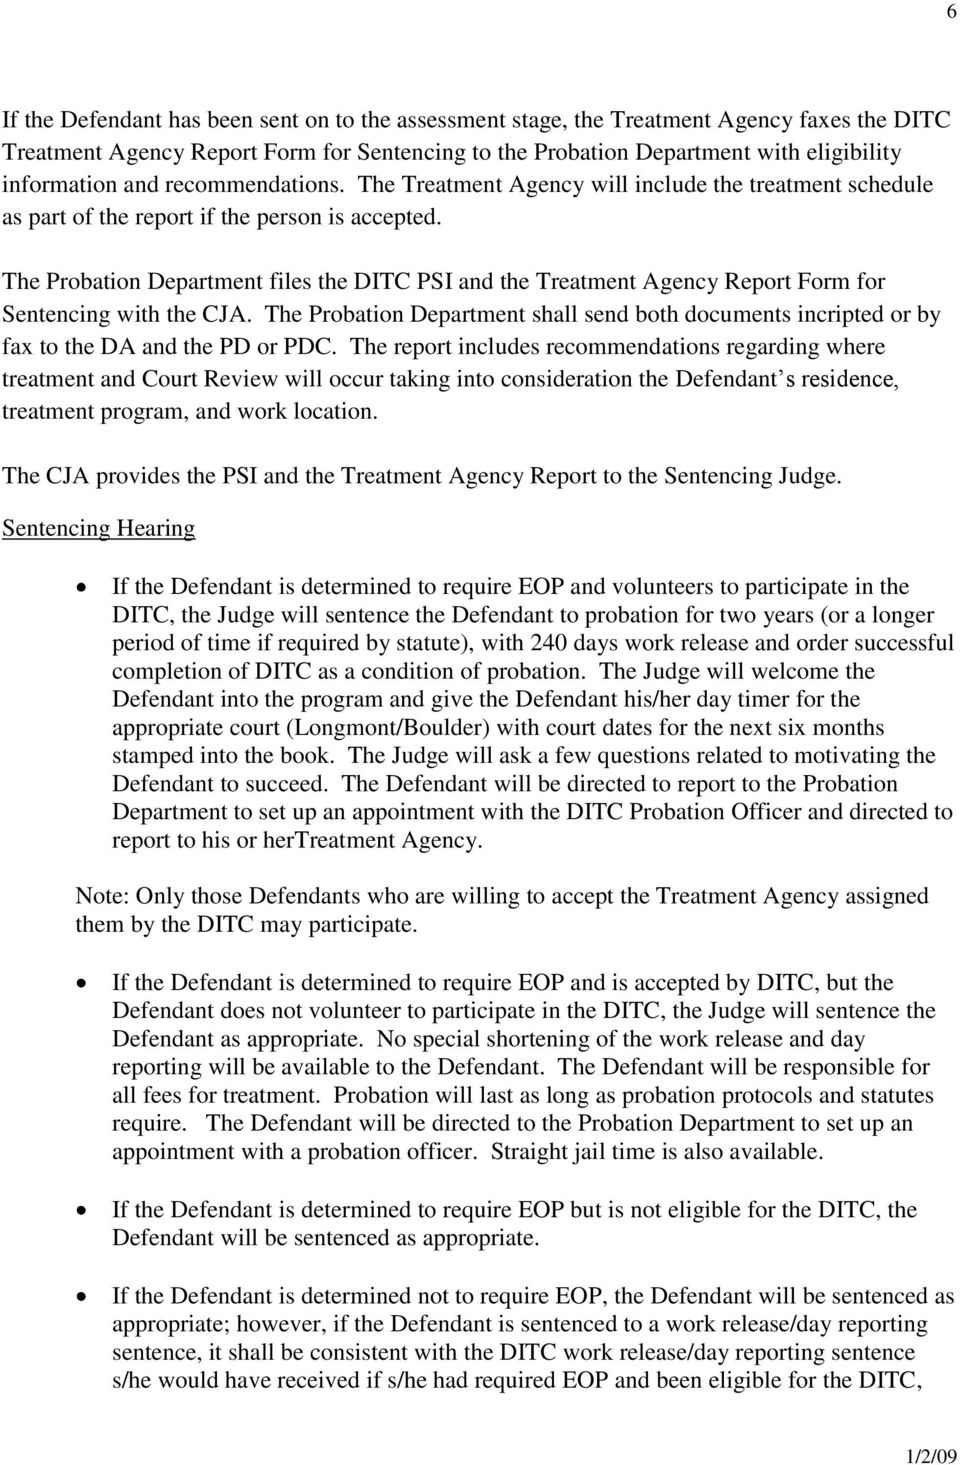 The Probation Department files the DITC PSI and the Treatment Agency Report Form for Sentencing with the CJA.